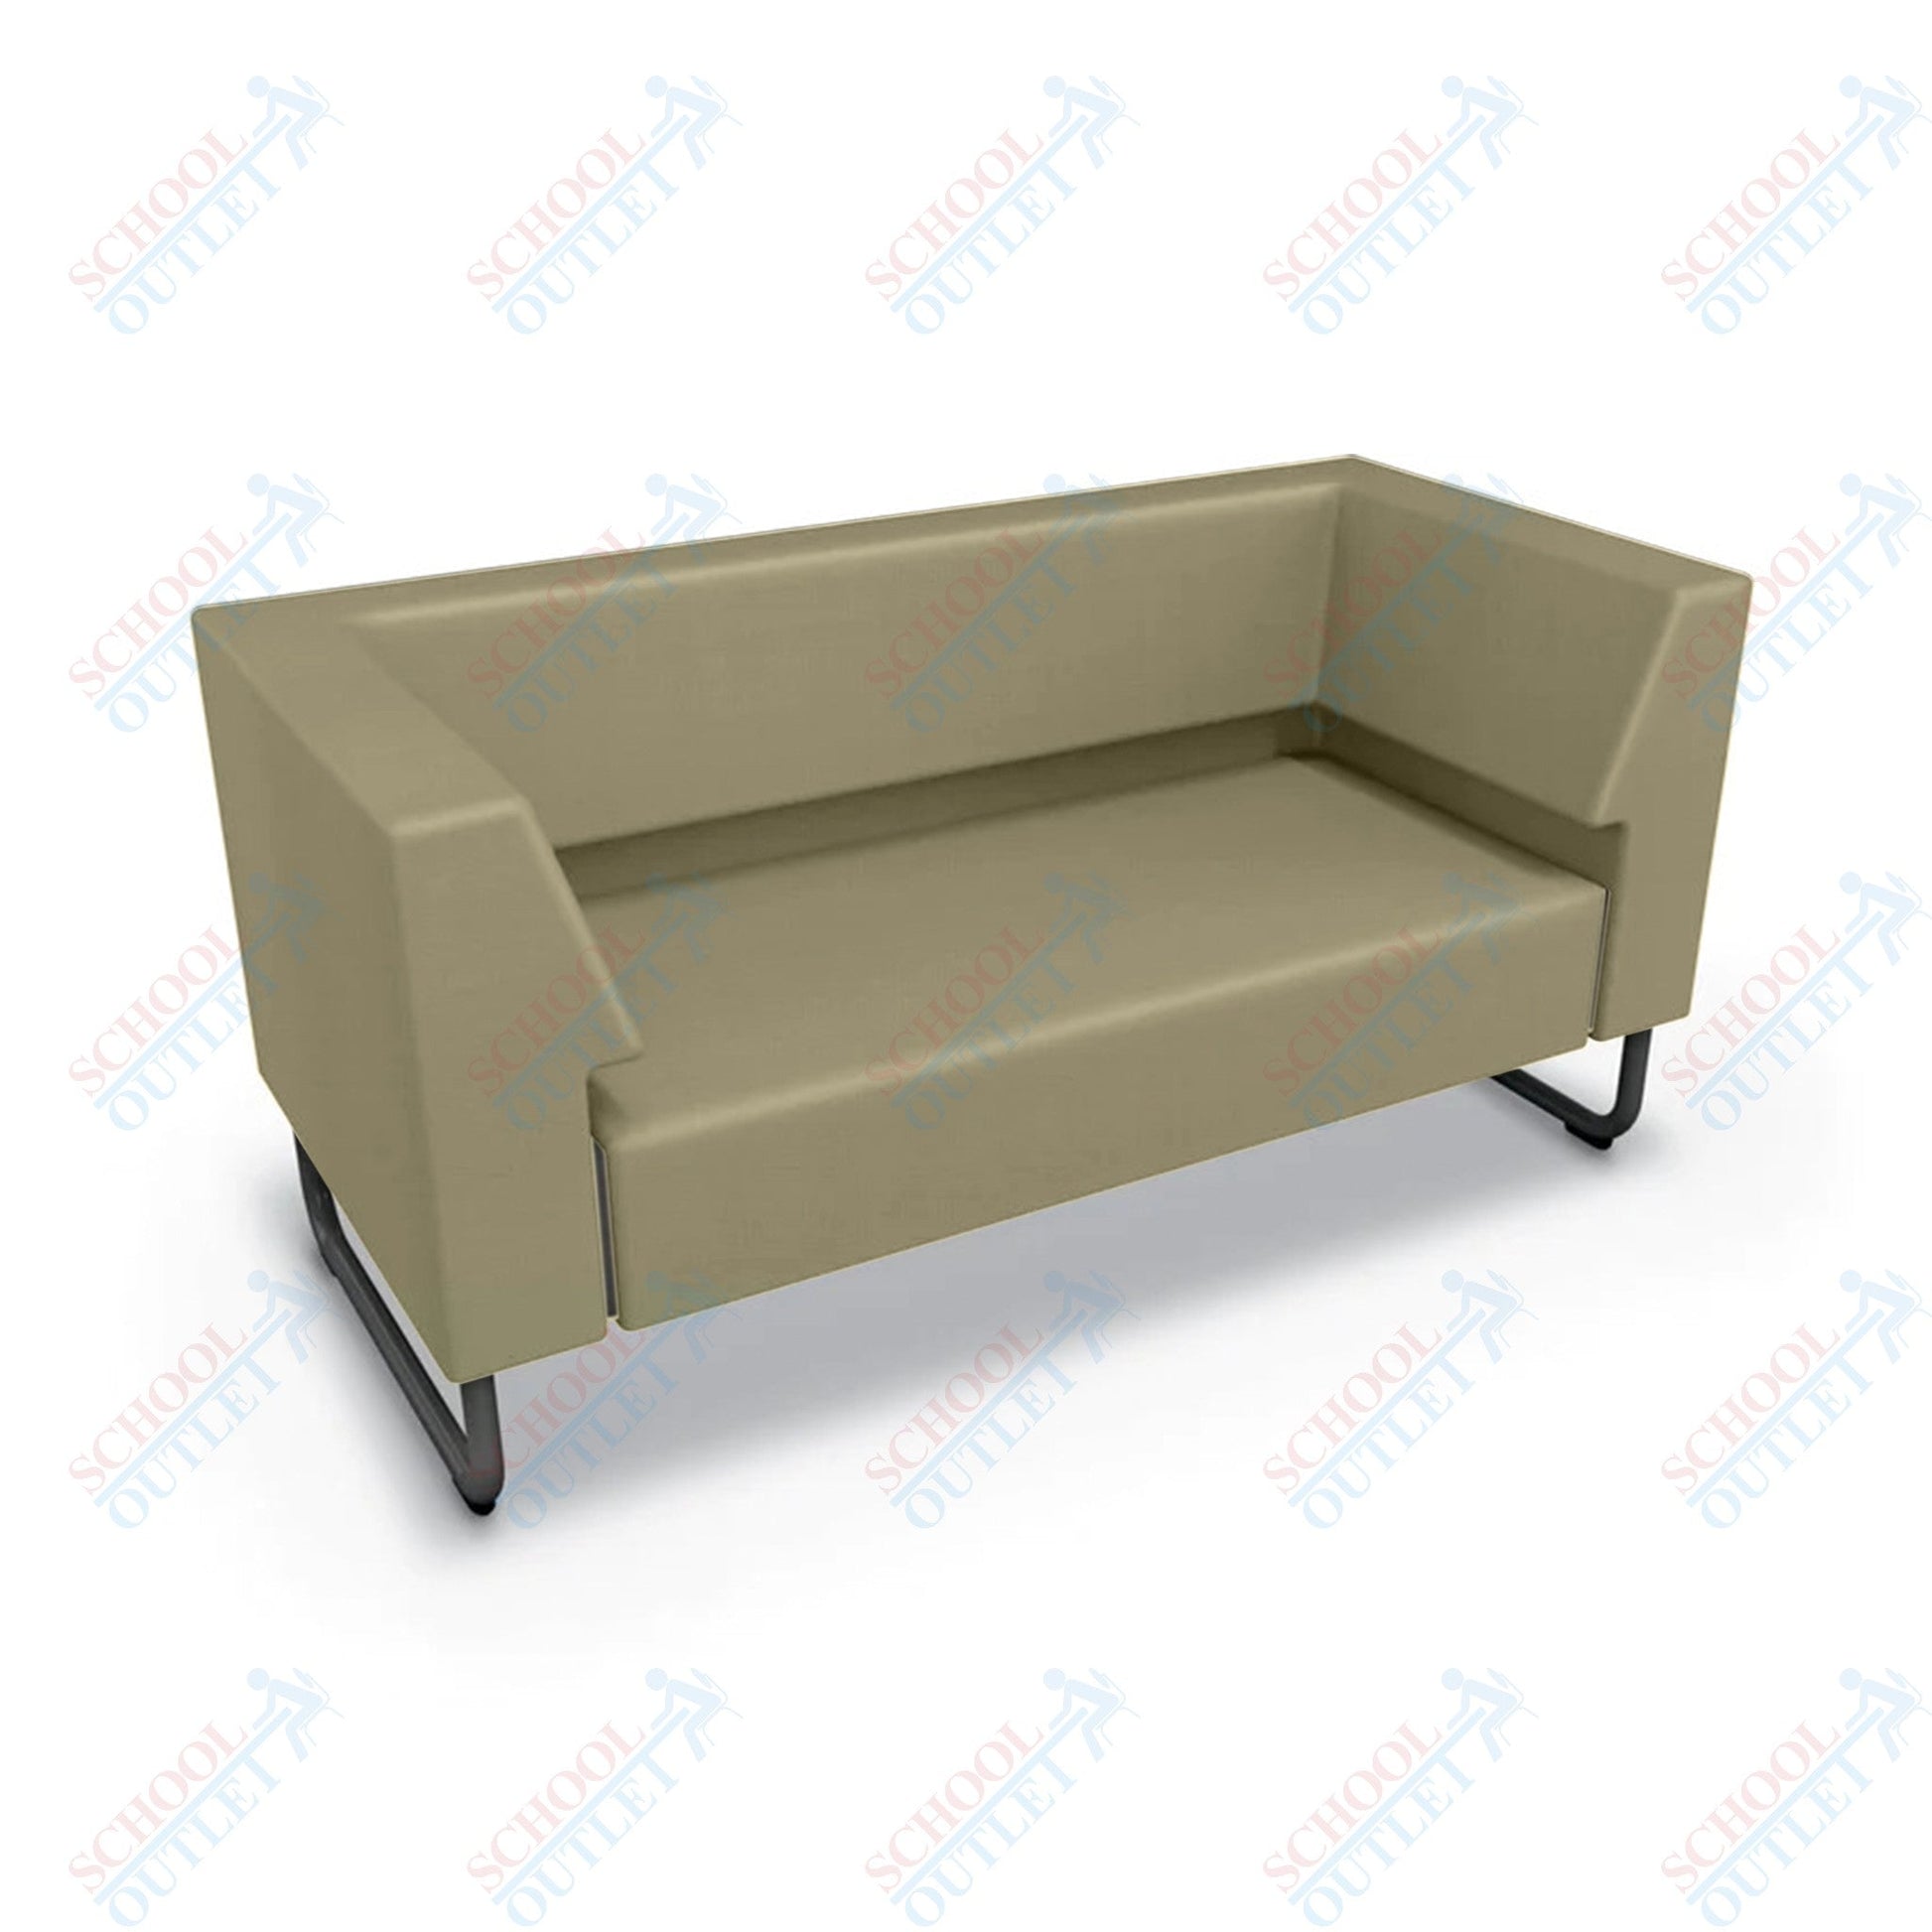 Mooreco Akt Soft Seating Lounge Loveseat - Both Arms - Grade 02 Fabric and Powder Coated Sled Legs - SchoolOutlet